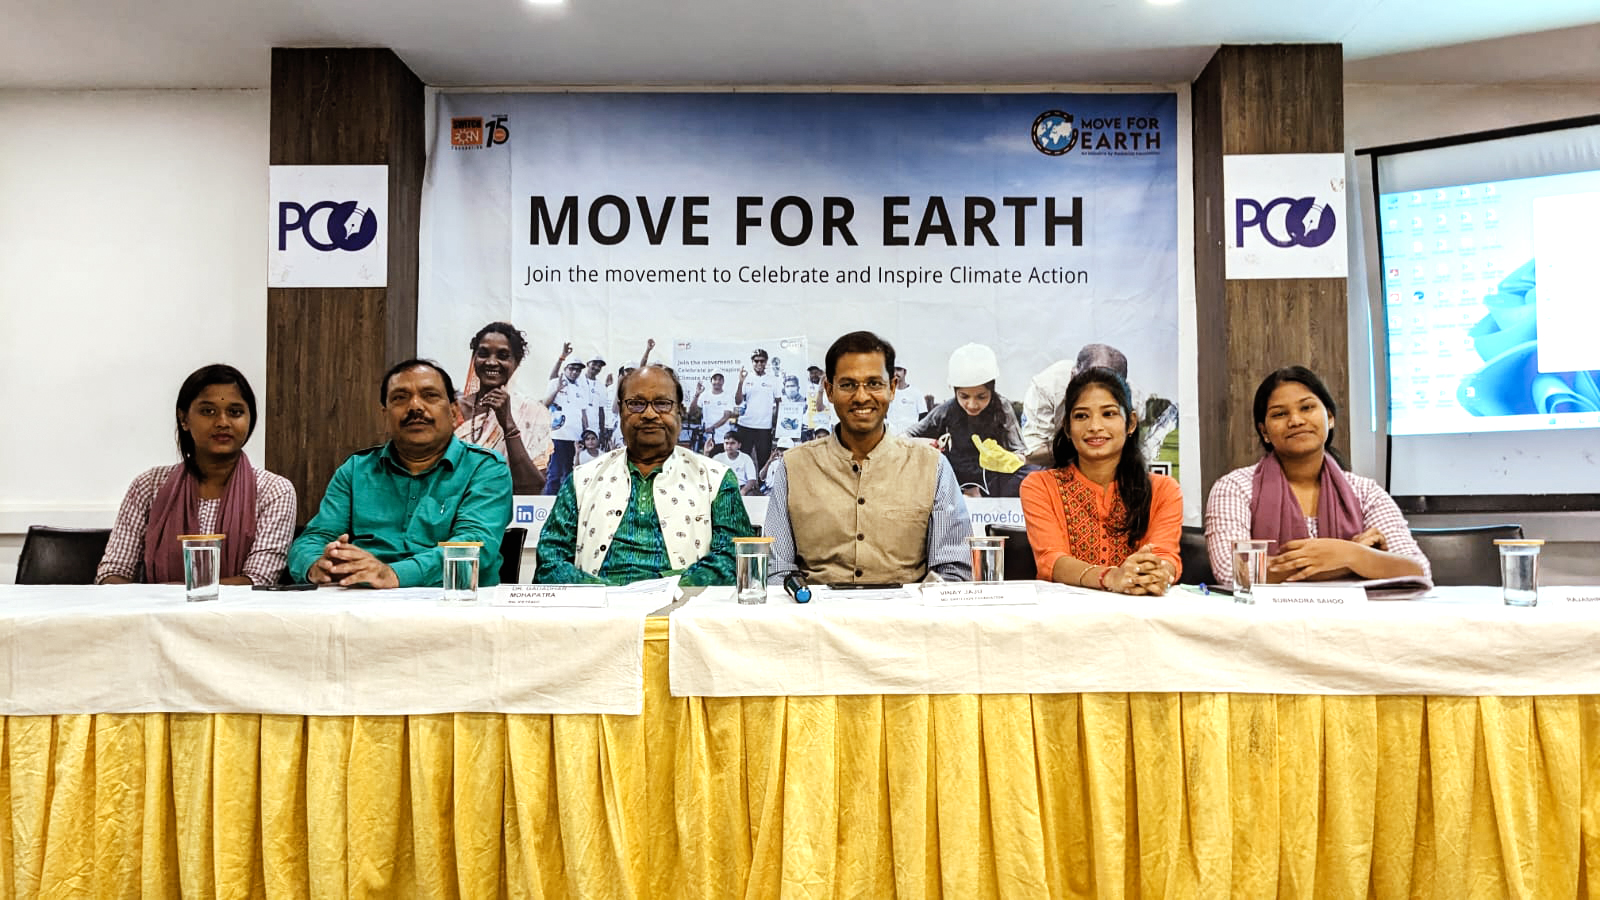 SwitchON Foundation launches Move for Earth movement to celebrate and inspire Climate Action in Odisha